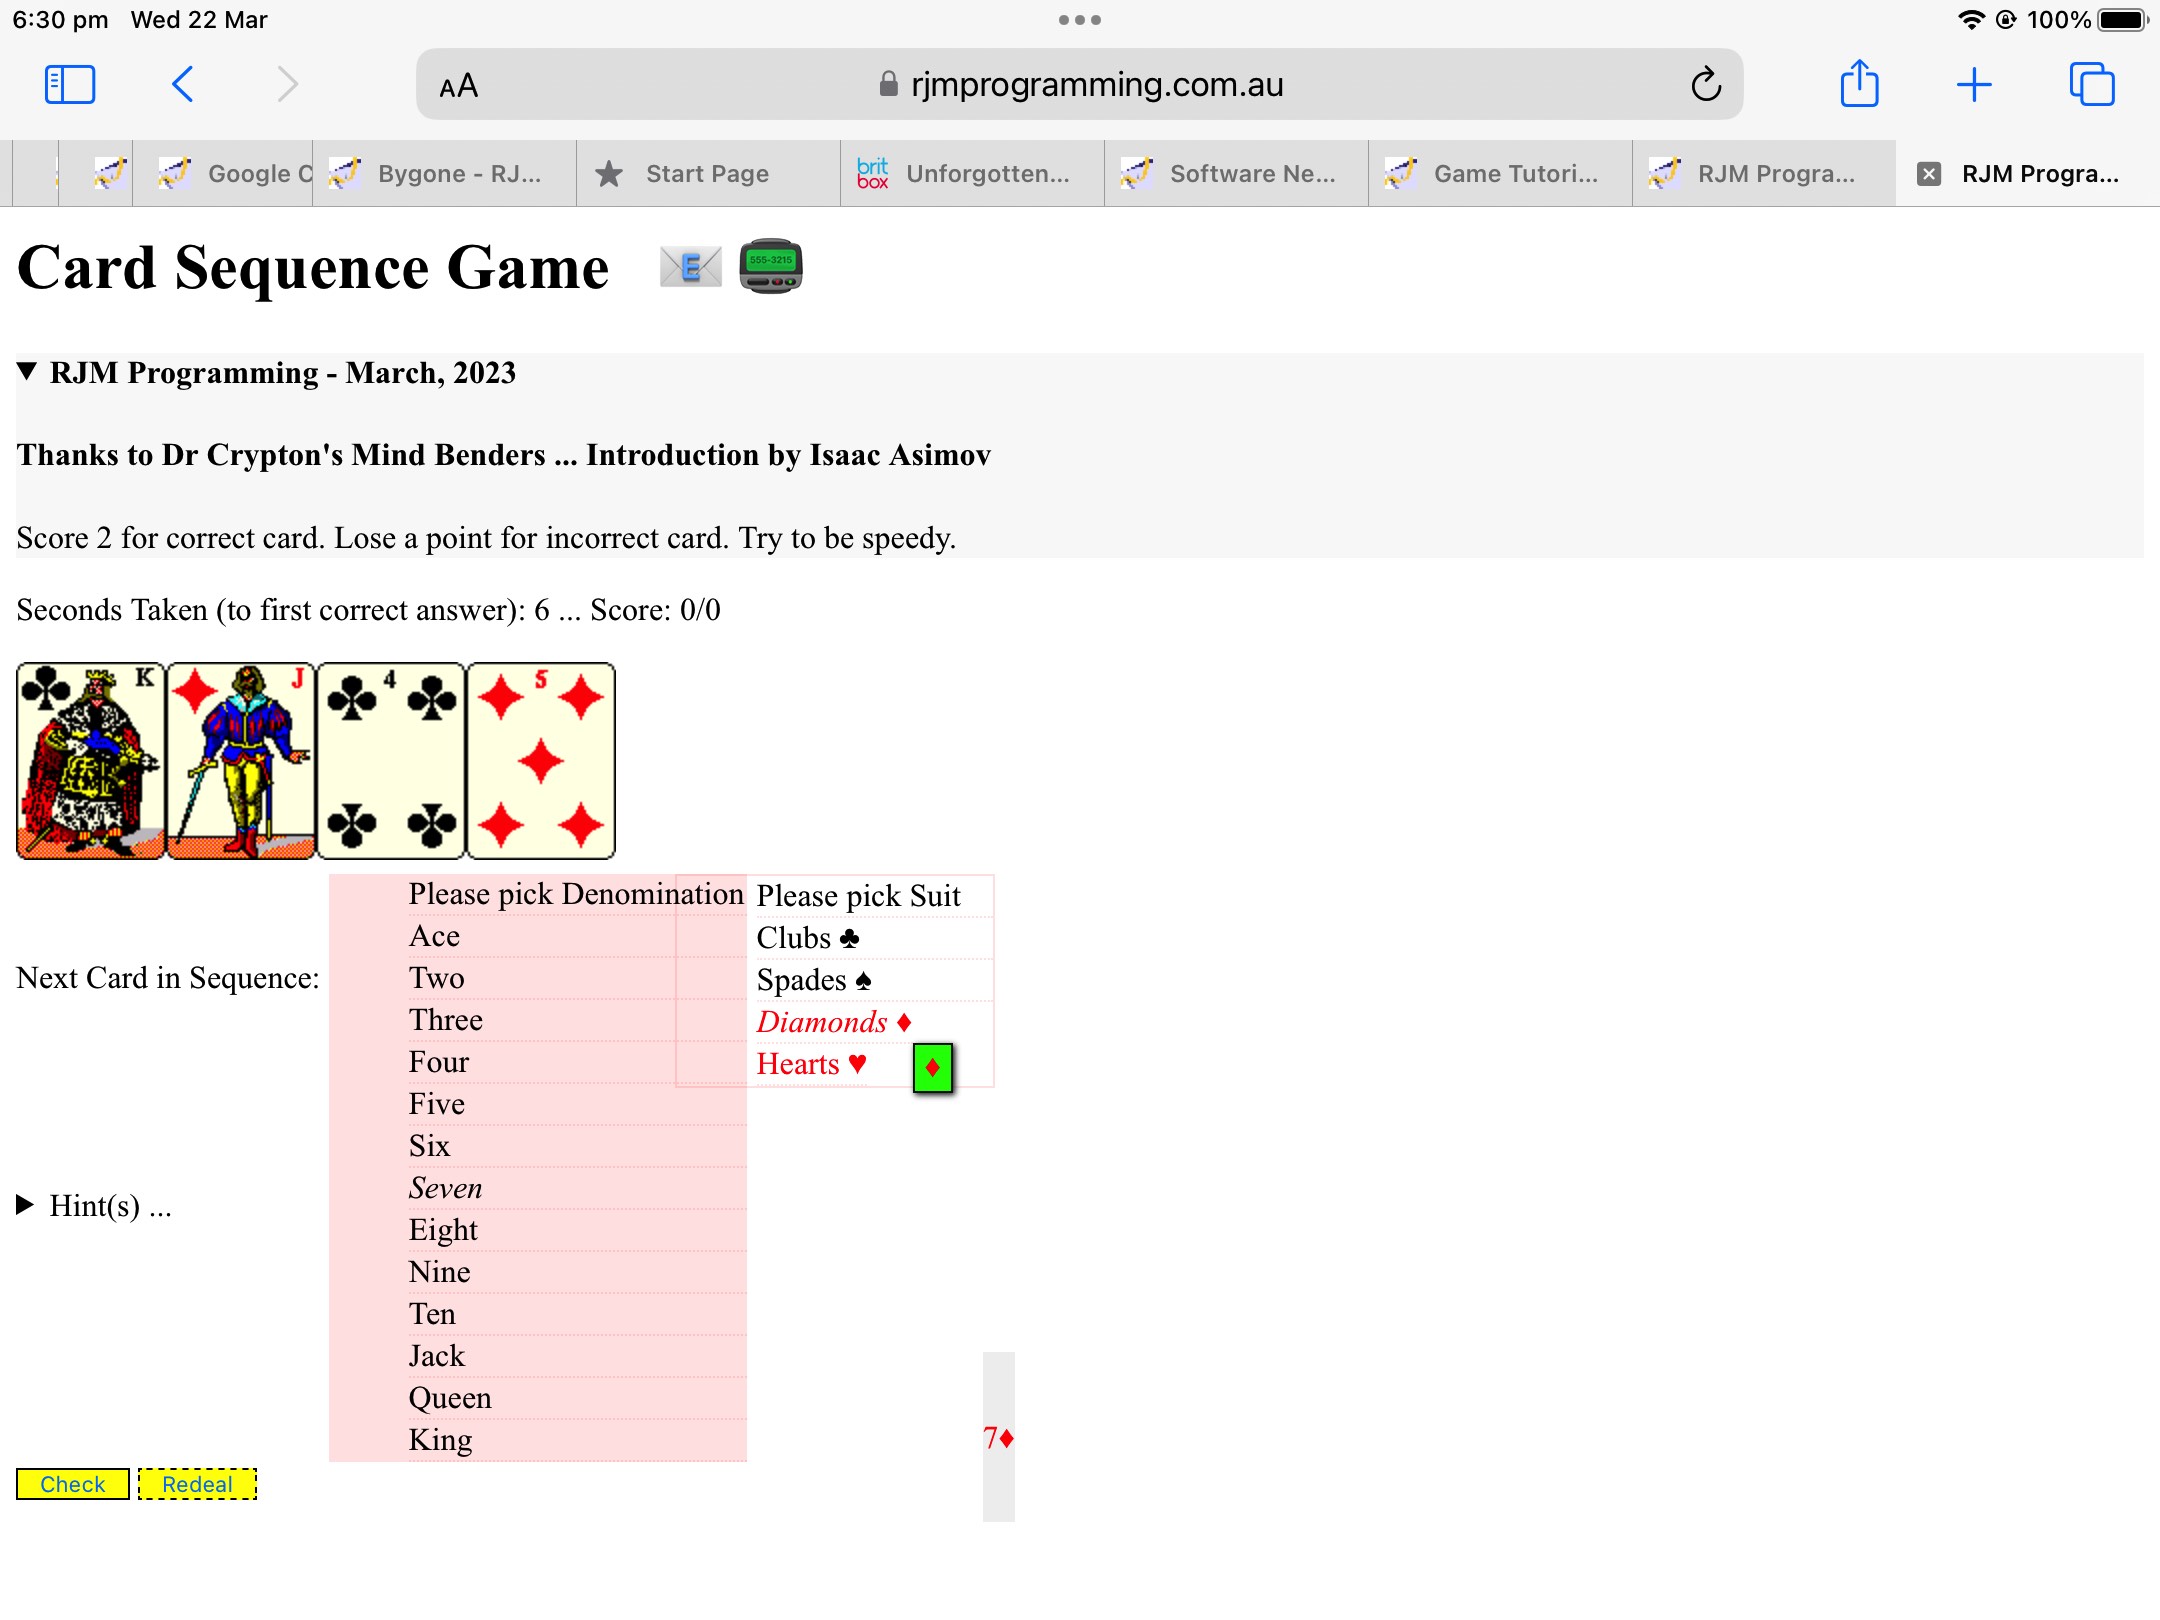 Card Sequence Game Multicoloured Dropdown and Mobile Tutorial